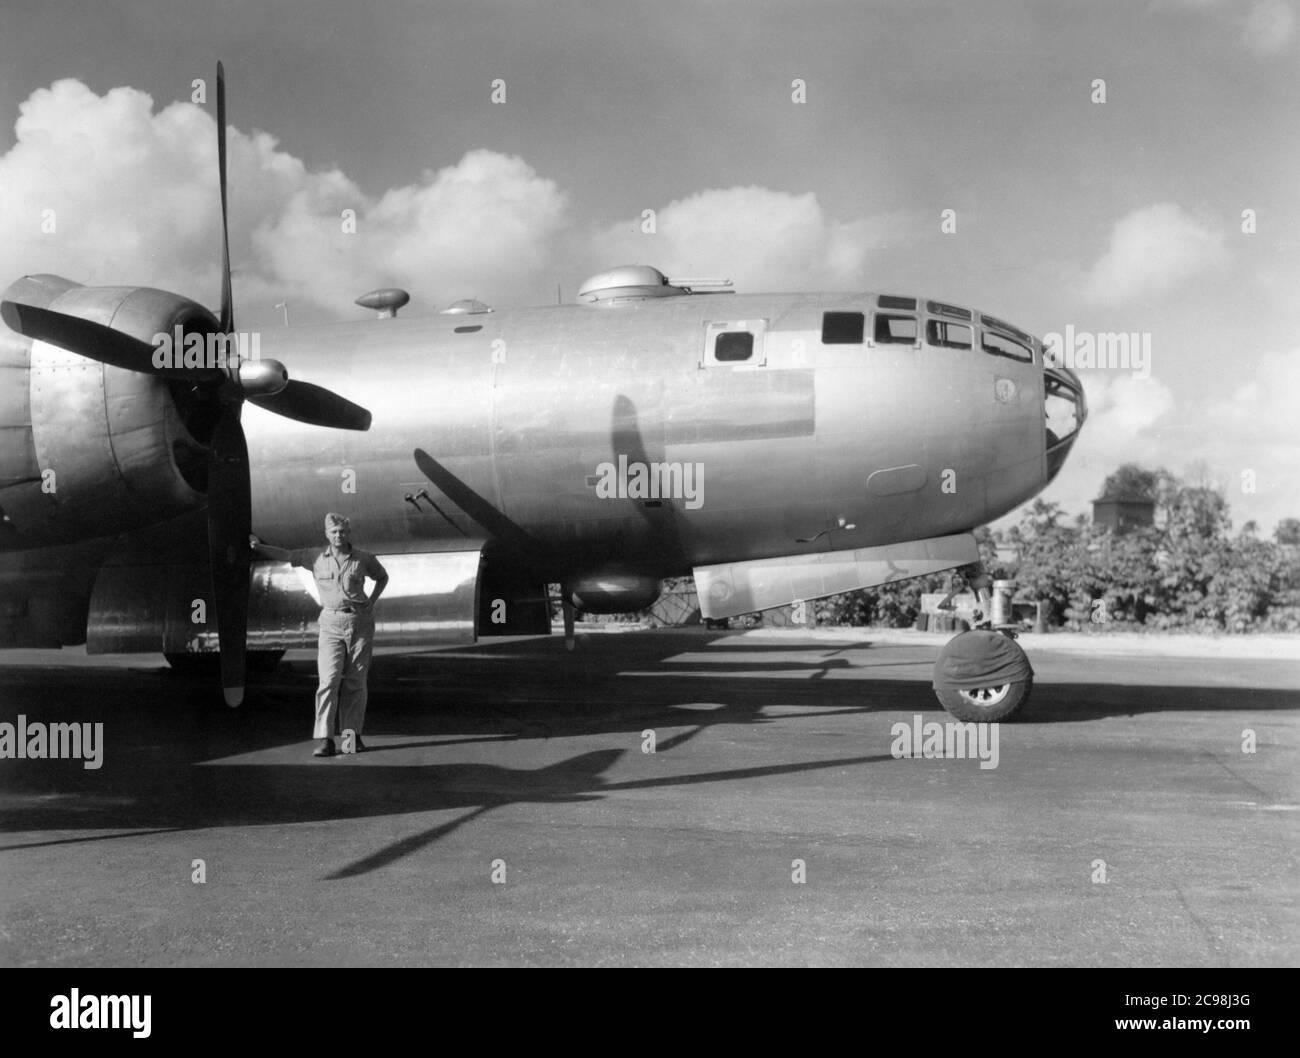 Boeing B-29 Superfortress on the flightline. Northfield, Guam, July 1945. As the 75th anniversary of V-J Day approaches, The Consoli Collection has published four photo essays by U.S. Navy Lt. (j.g.) Joseph J. Consoli. The photos were taken between July and December 1945 in the Mariana Islands. They document U.S. Navy life before and after the Japanese surrender. Stock Photo